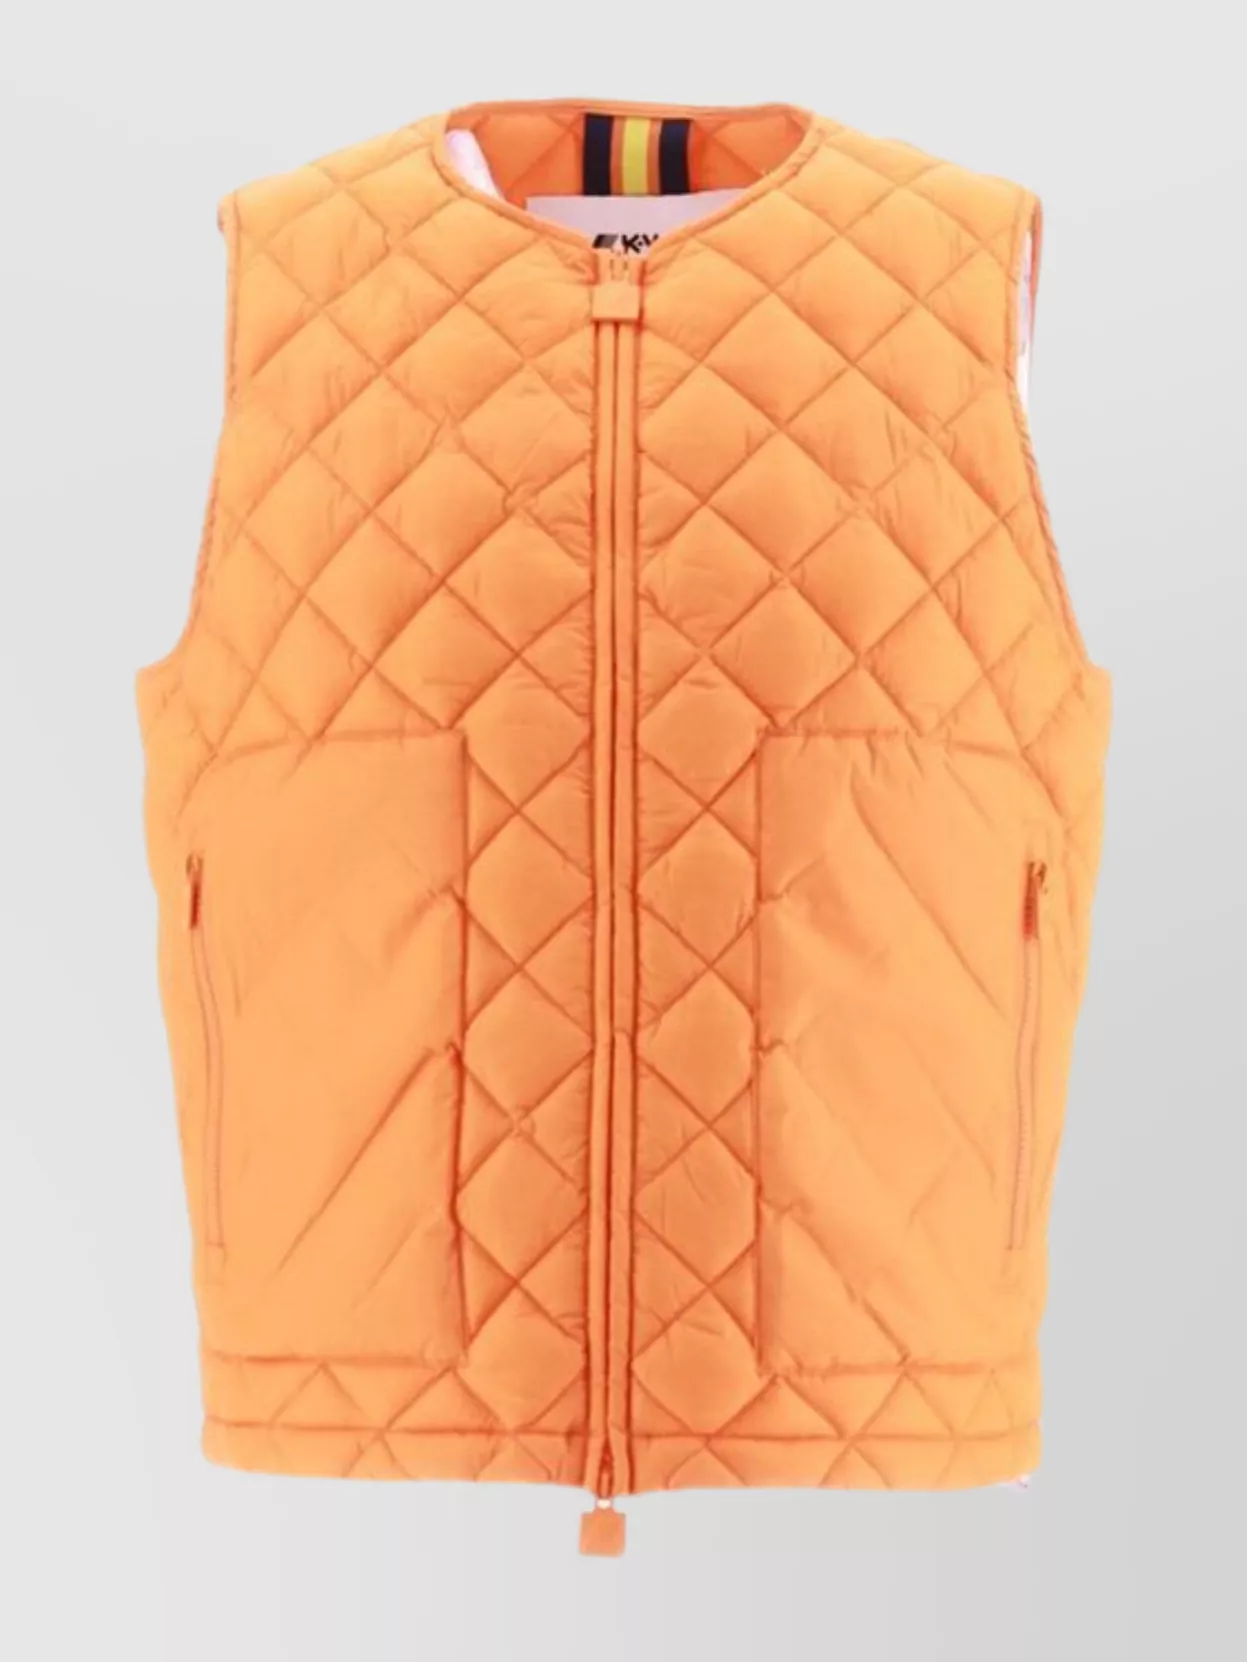 K-way Quilted Warmth Sleeveless Stand Collar In Orange